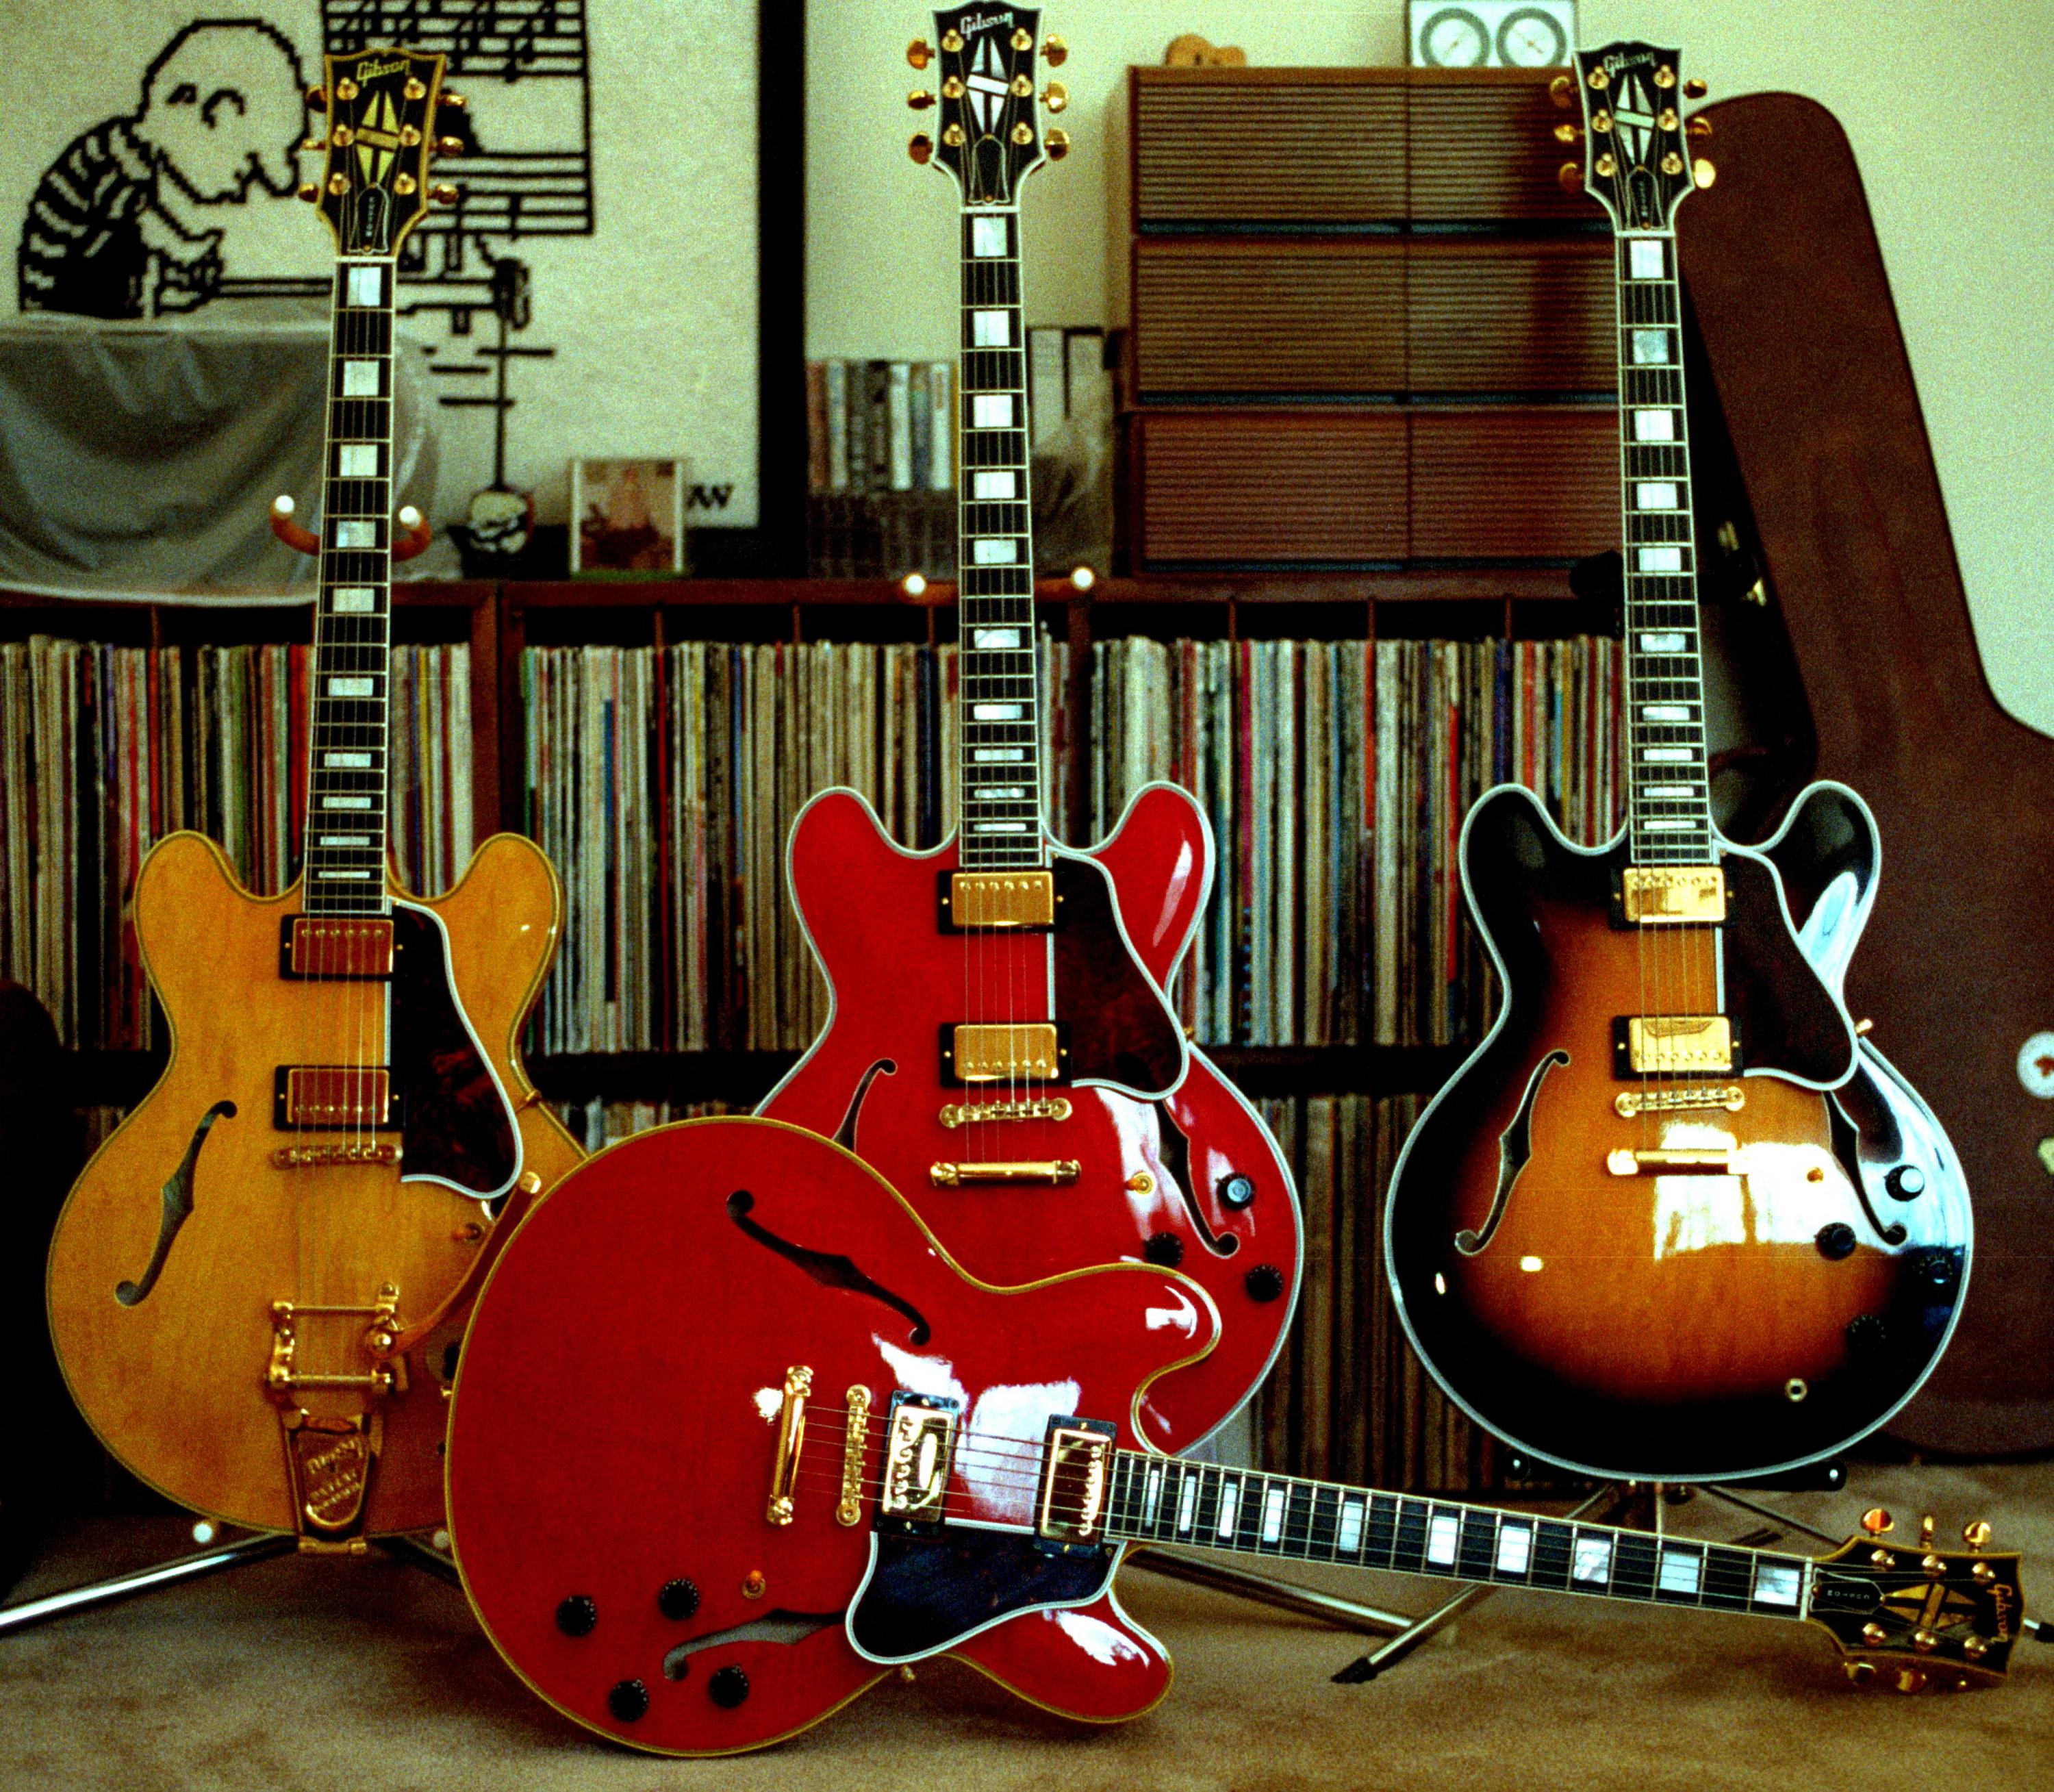 ES-335 style guitar love thread, no telecasters allowed-355-collect-3_054-jpg